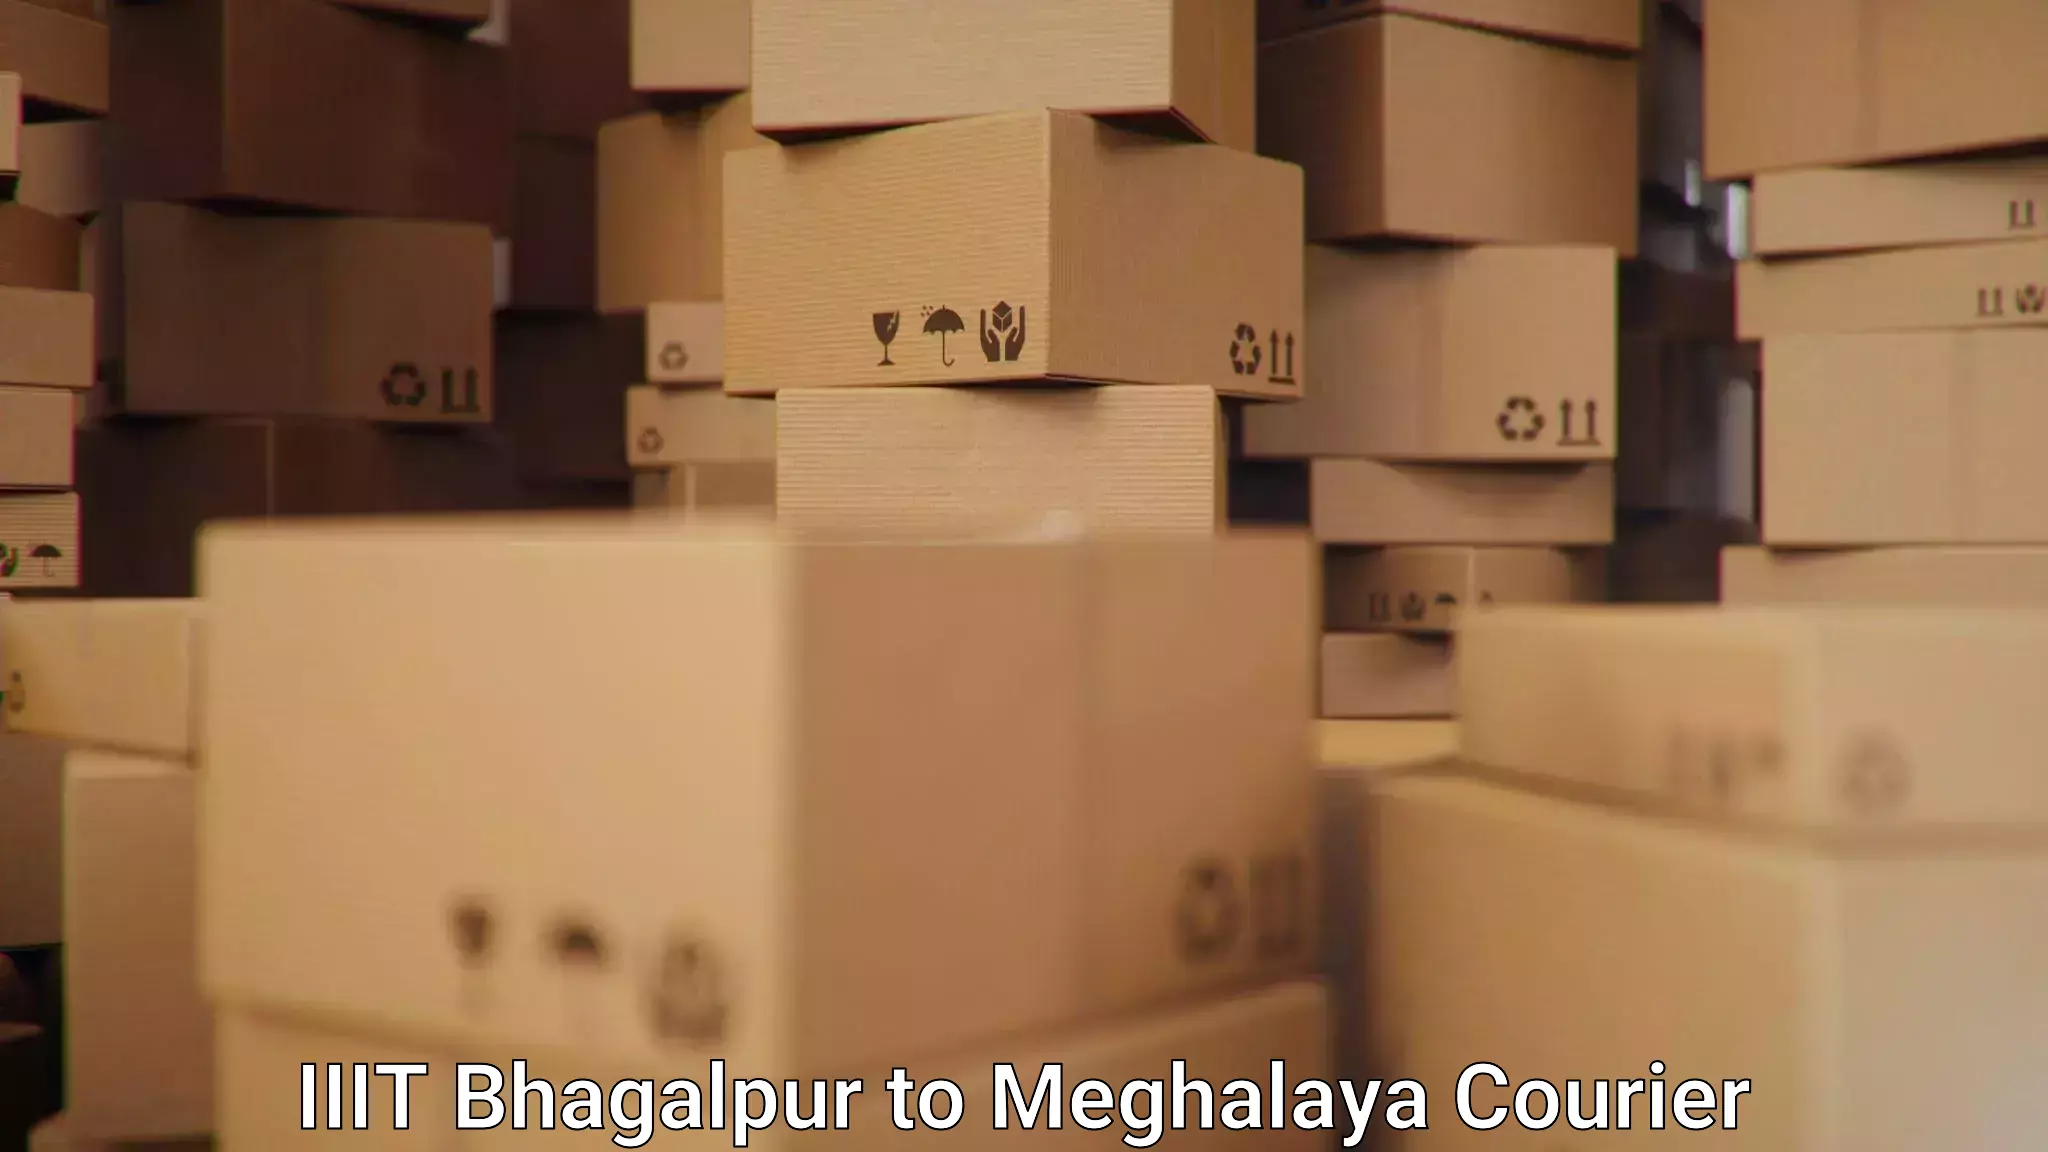 Courier membership IIIT Bhagalpur to Shillong